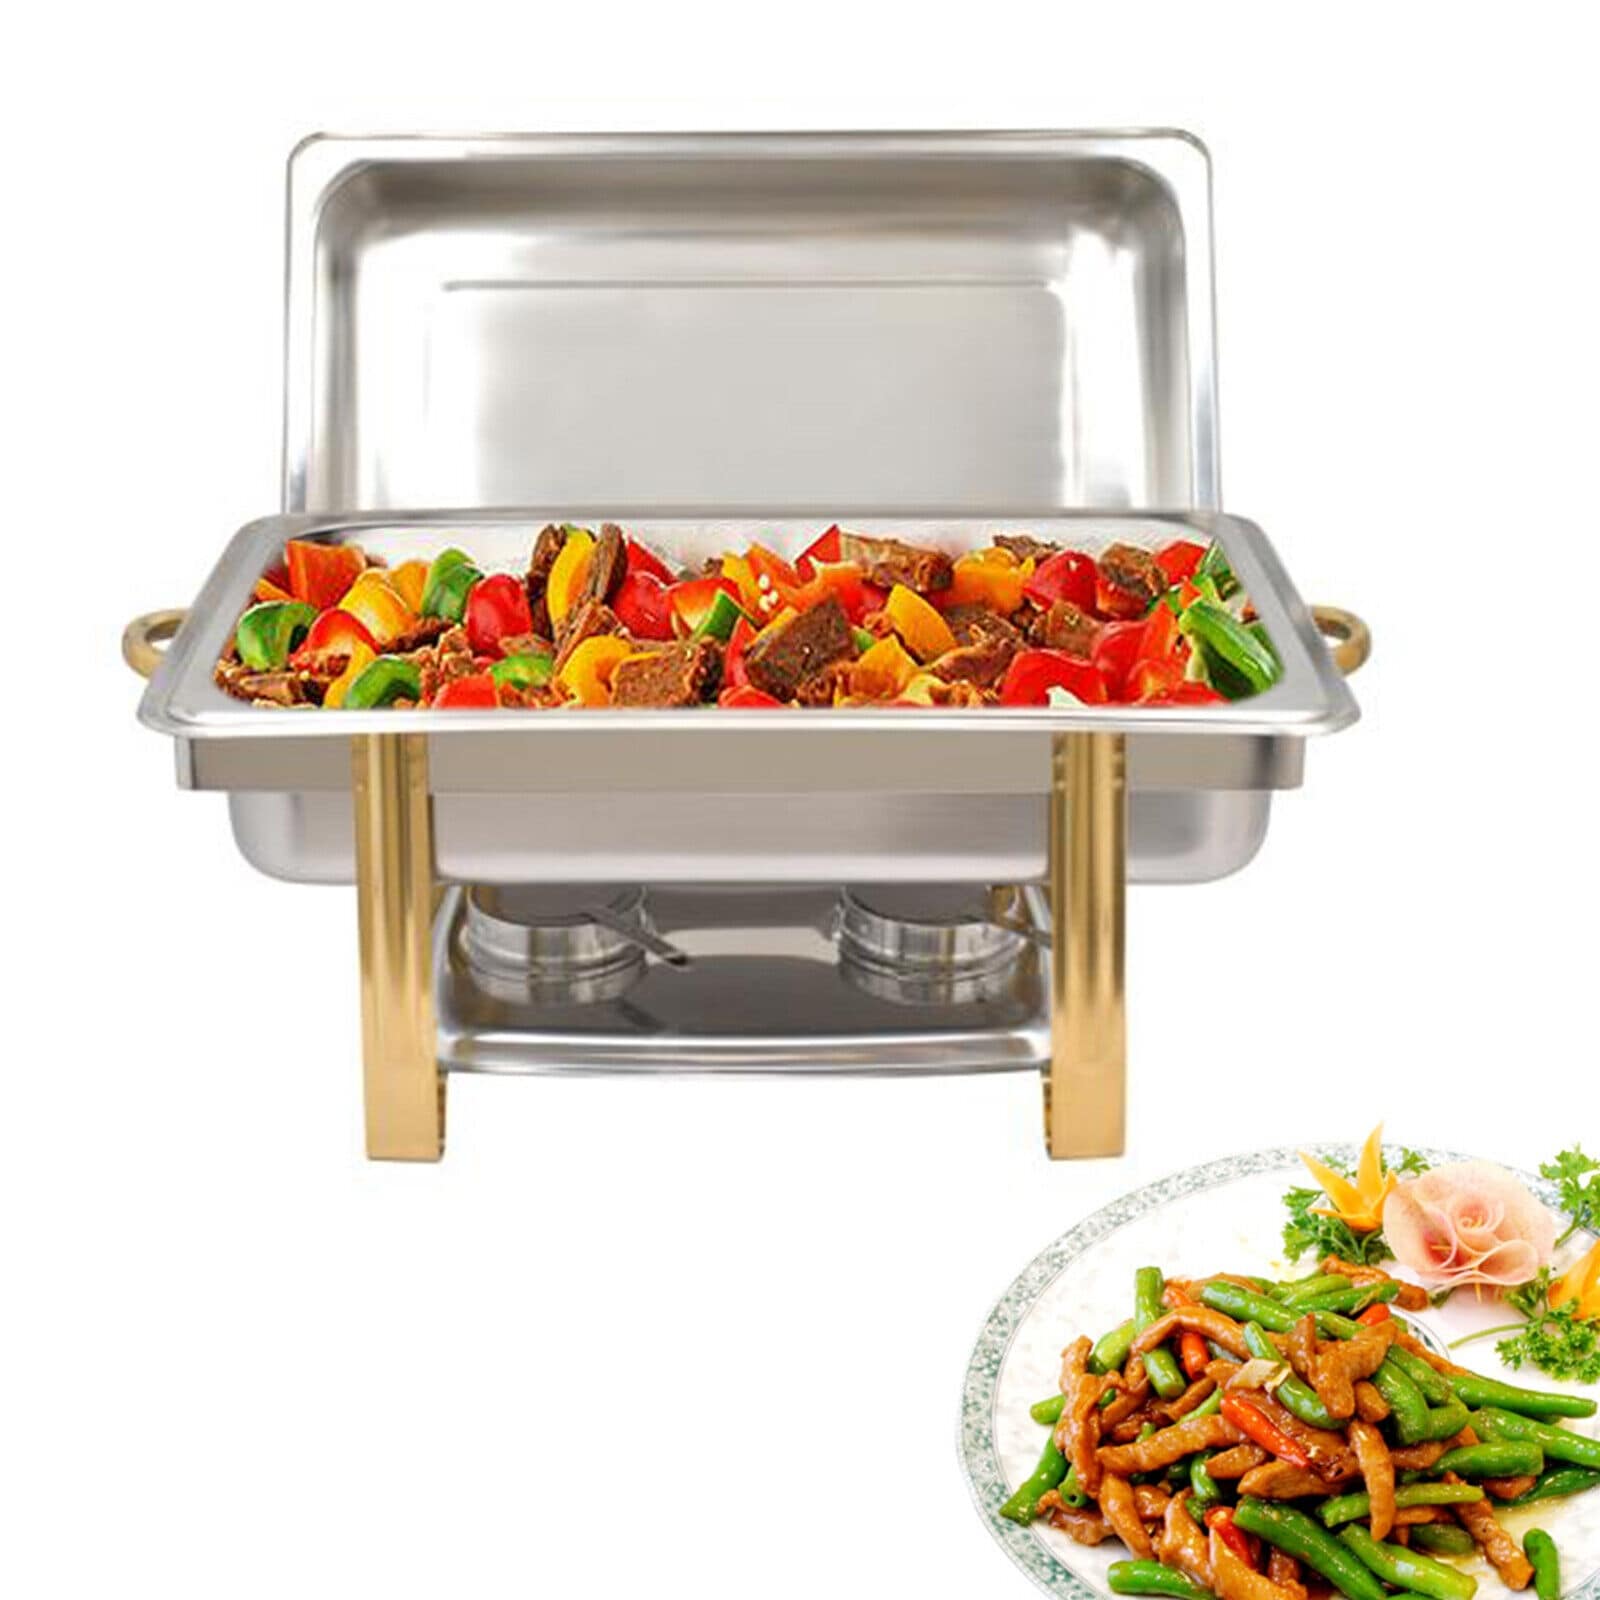 Silver Top Rated Chafing Dishes - Bed Bath & Beyond